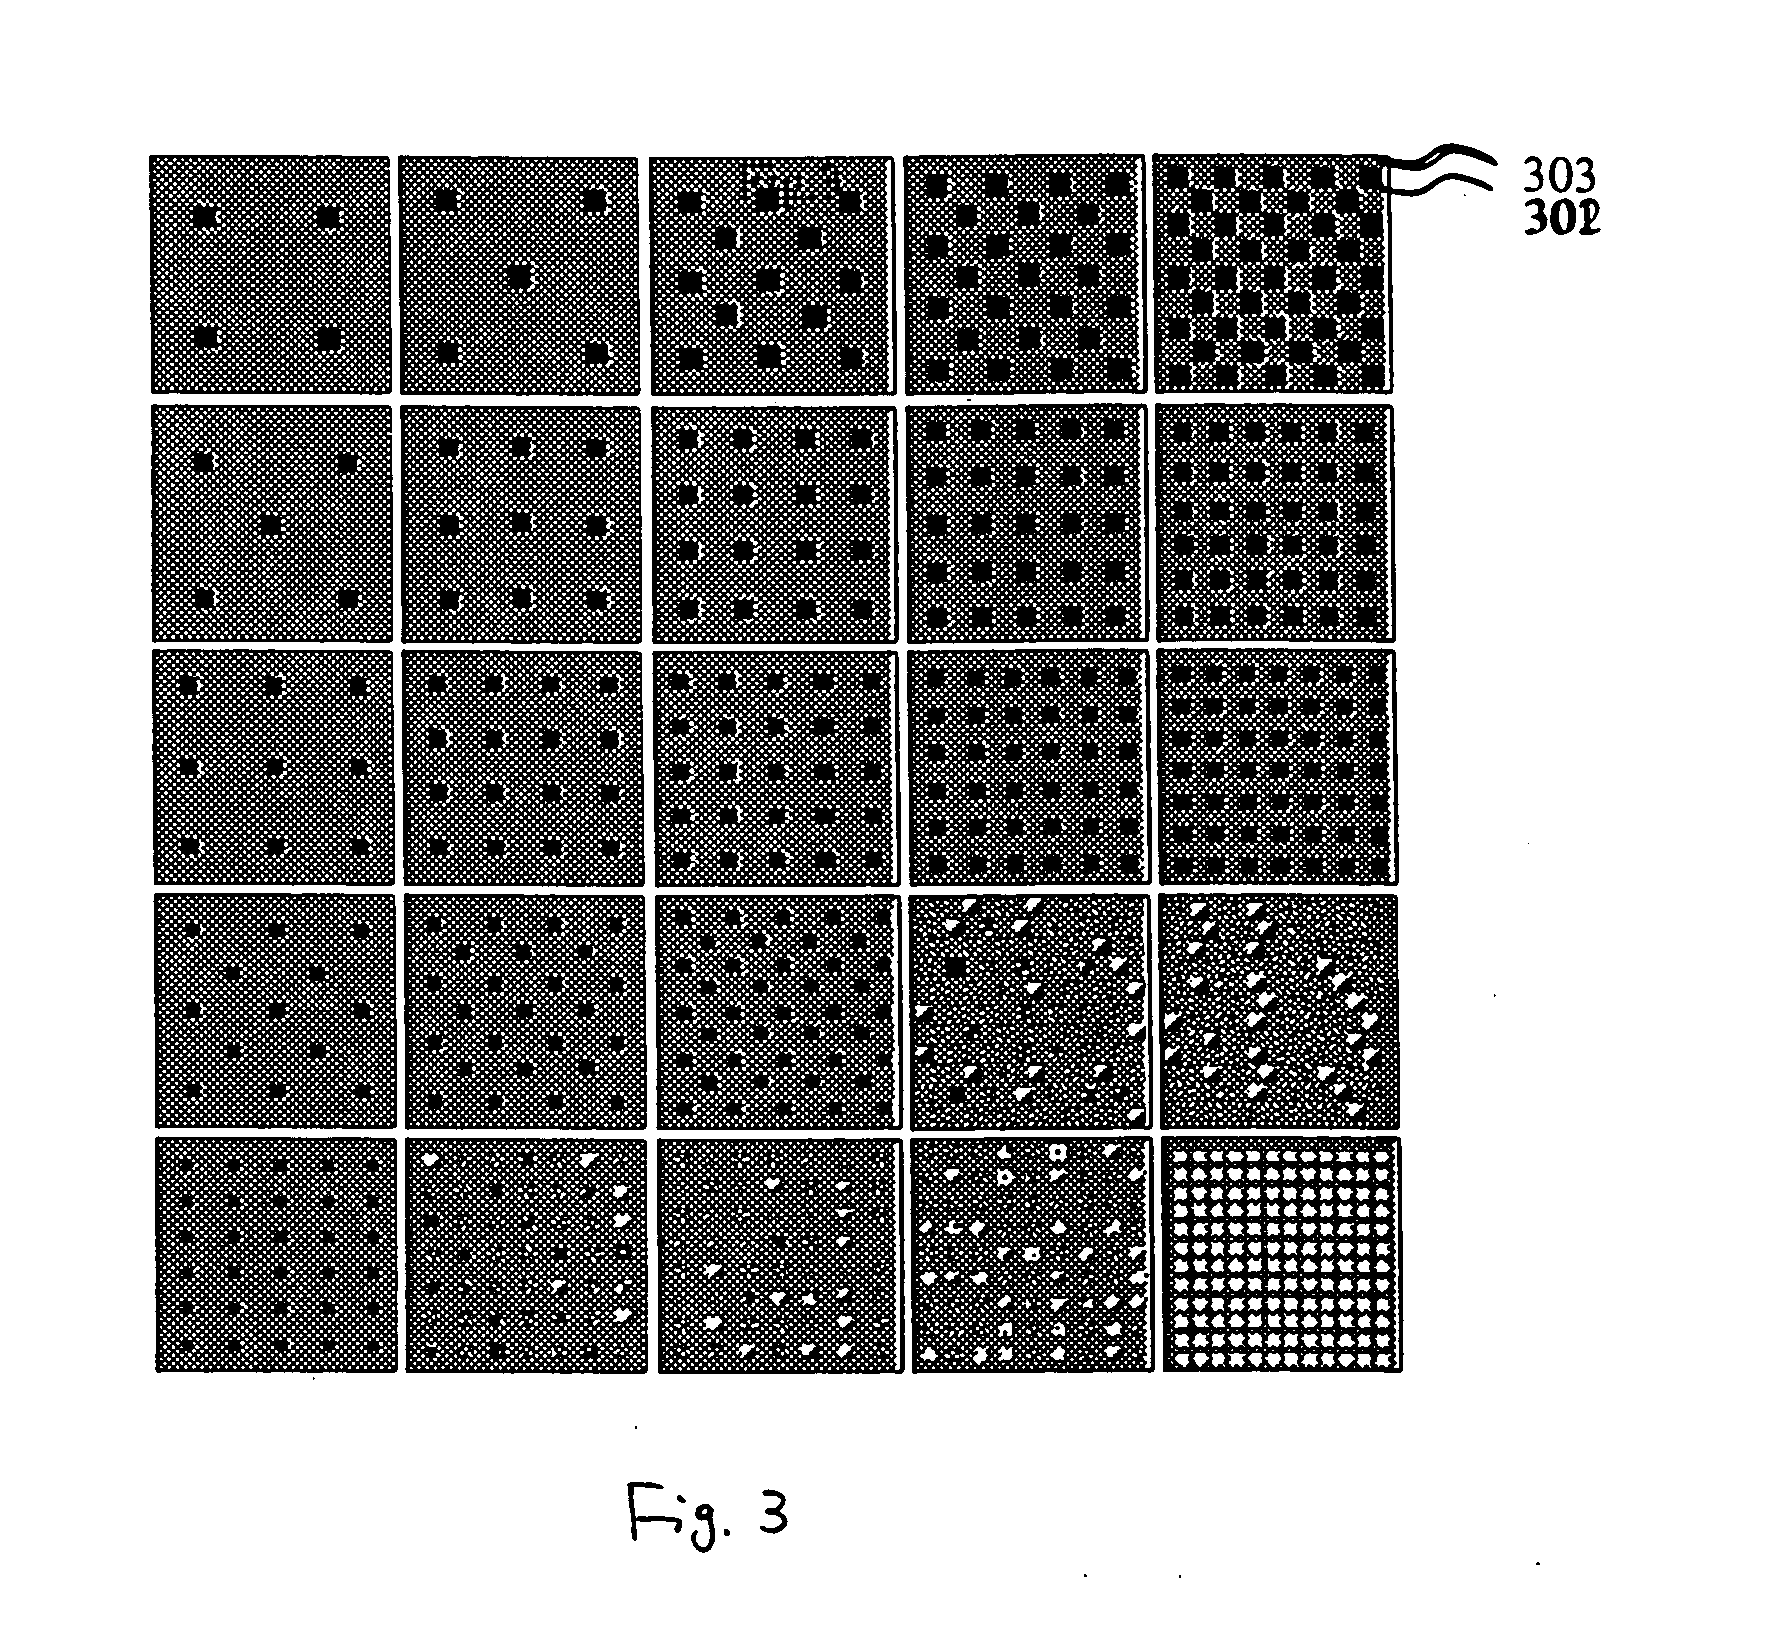 Method for in-line monitoring of via/contact holes etch process based on test structures in semiconductor wafer manufacturing